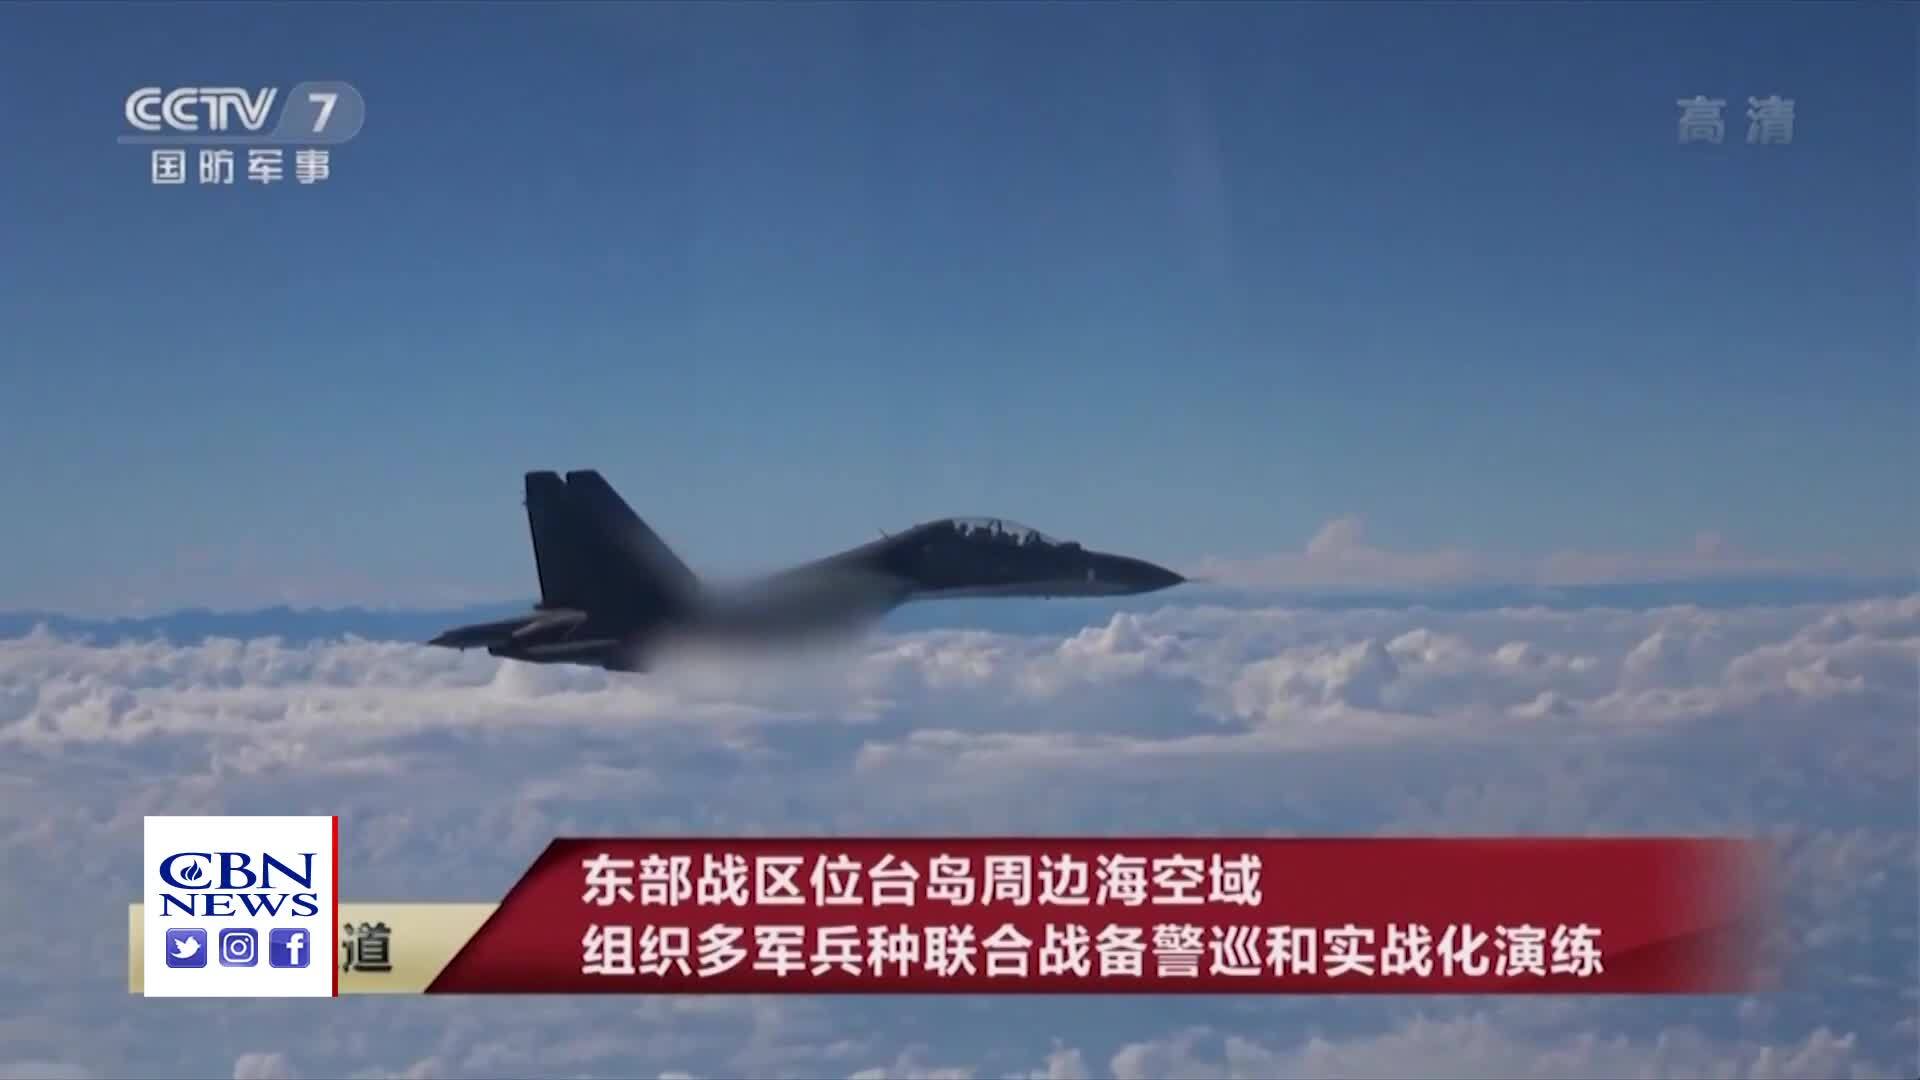 China 'Sprinting' to Usurp US Superpower Status, Military Escalation Seen  as Prelude to Taiwan Takeover | CBN News